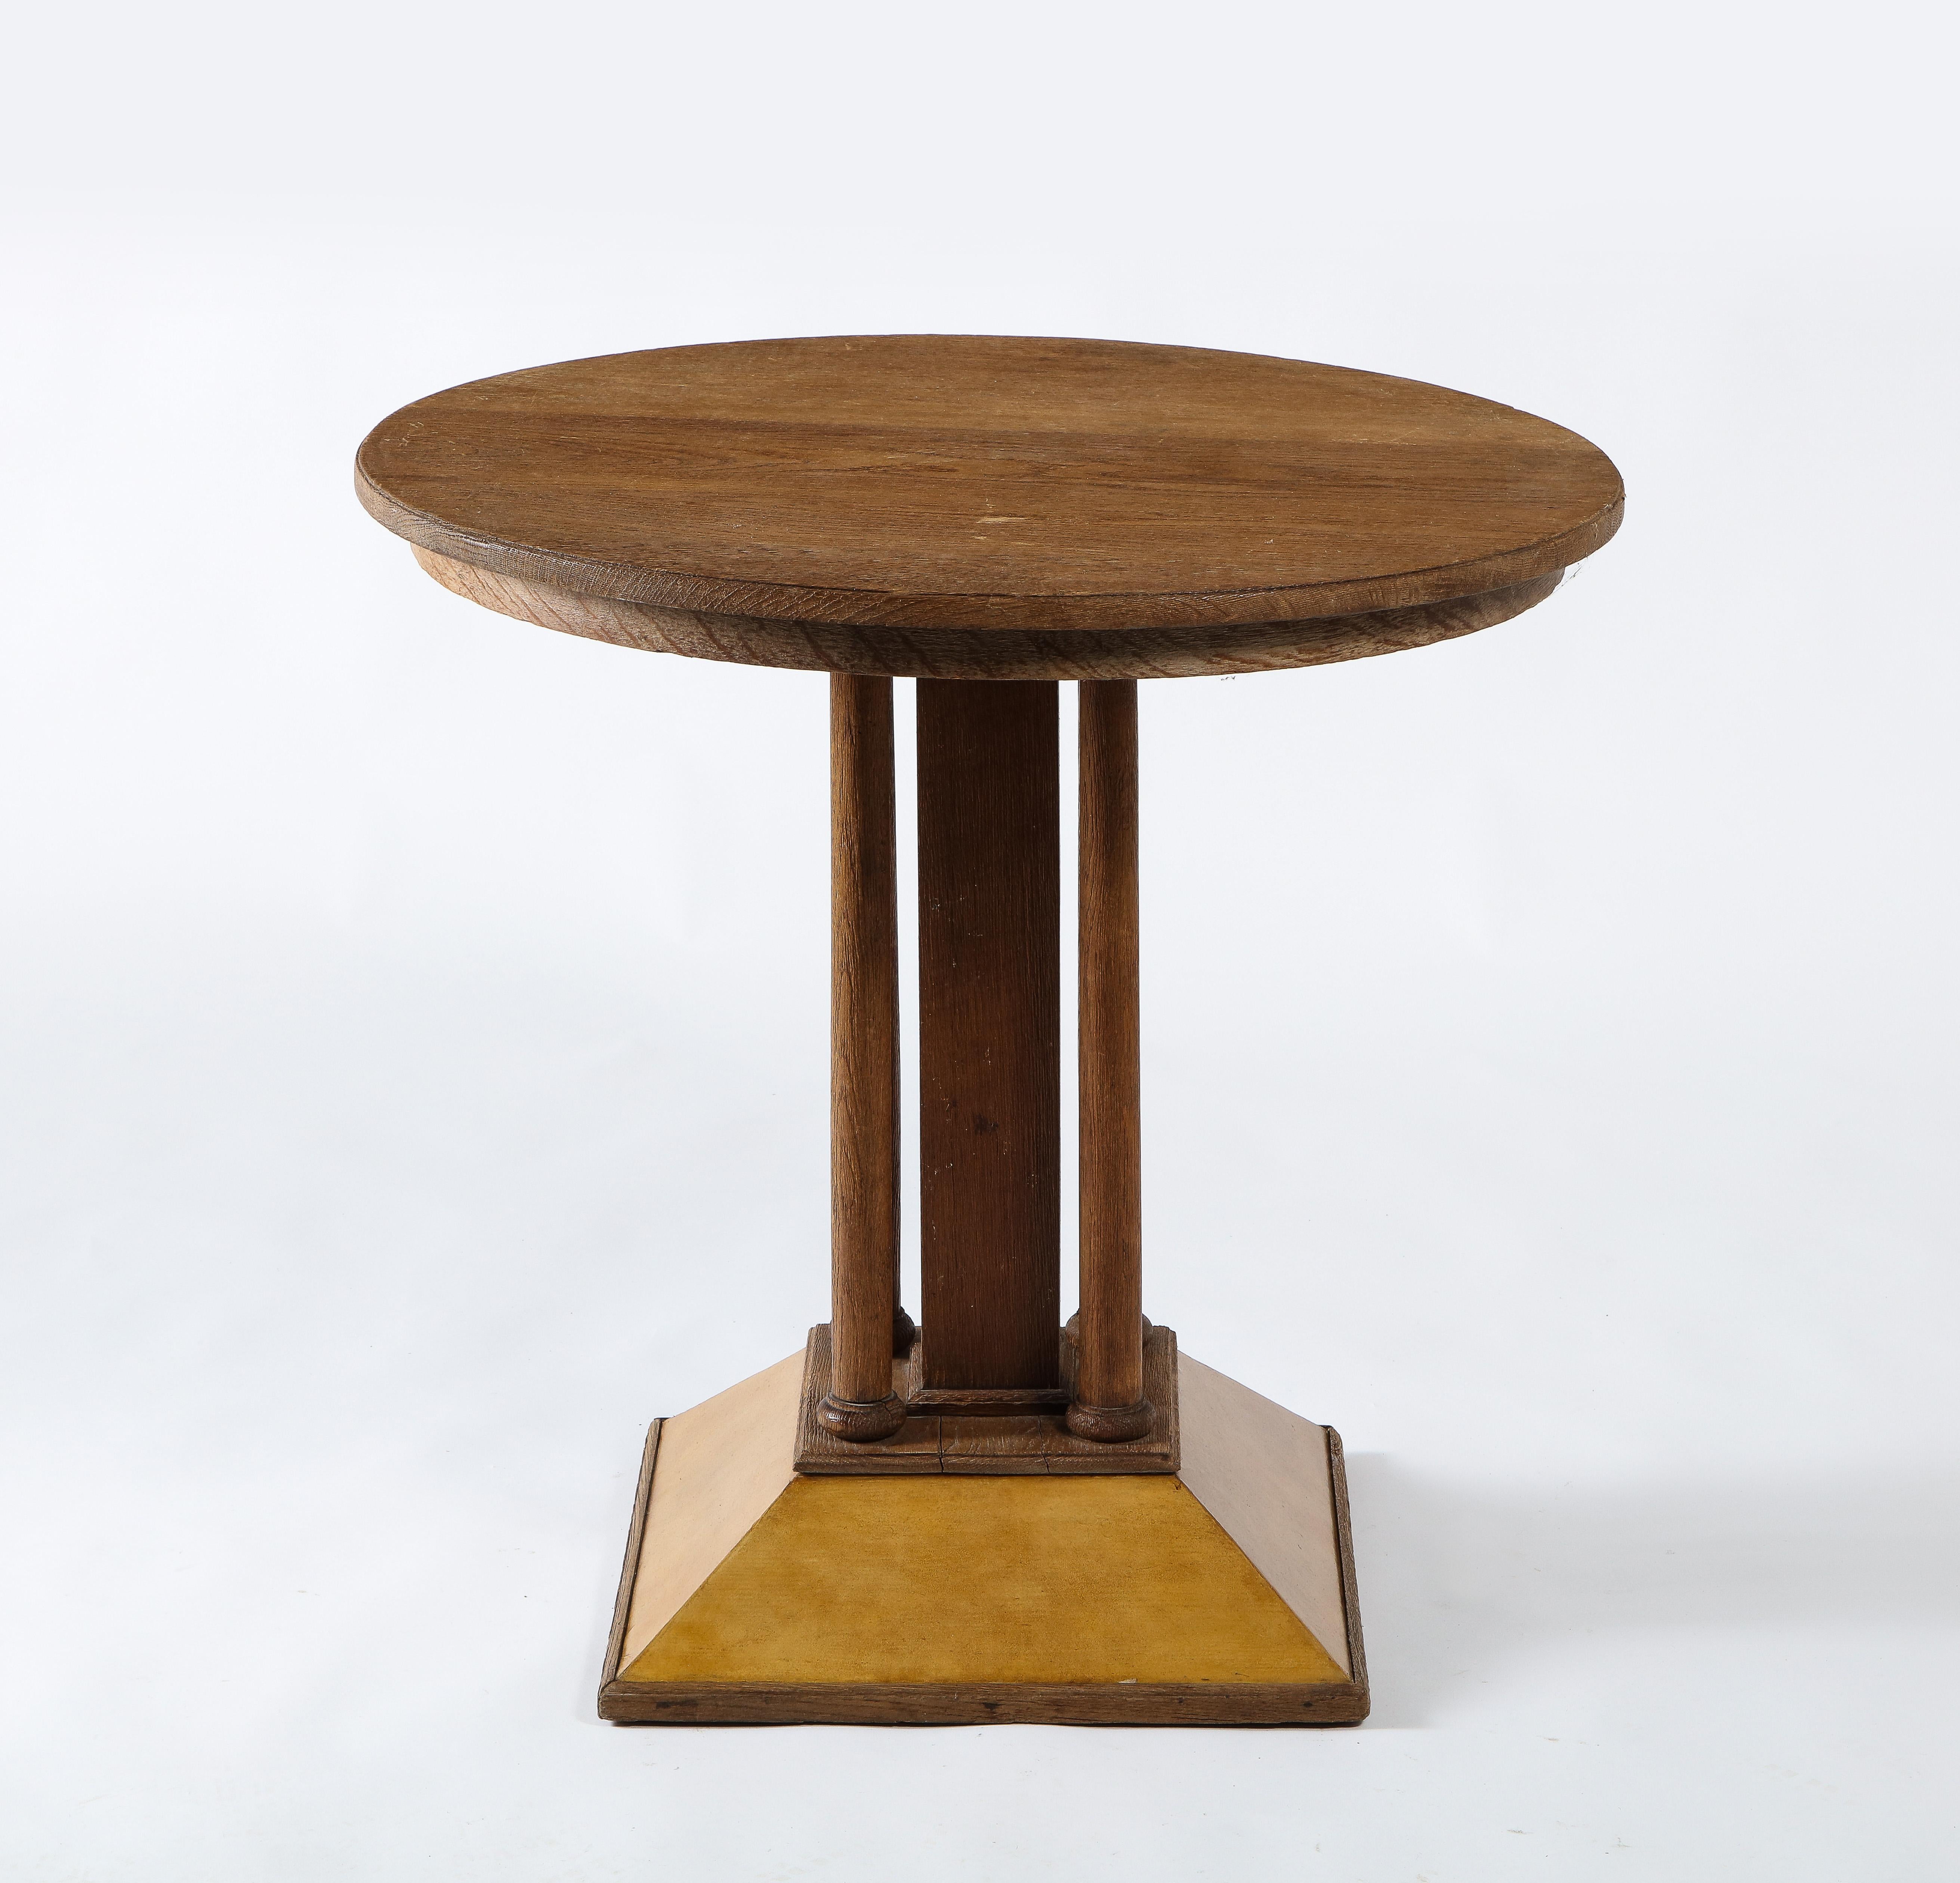 Elegant French oak and parchment gueridon in the Viennese secession style. an interesting blend of JMF touches, parchment, raw oak on a classic Viennese form with round top, 5 pillars base ending in a square pyramidal base clad in parchment. In its